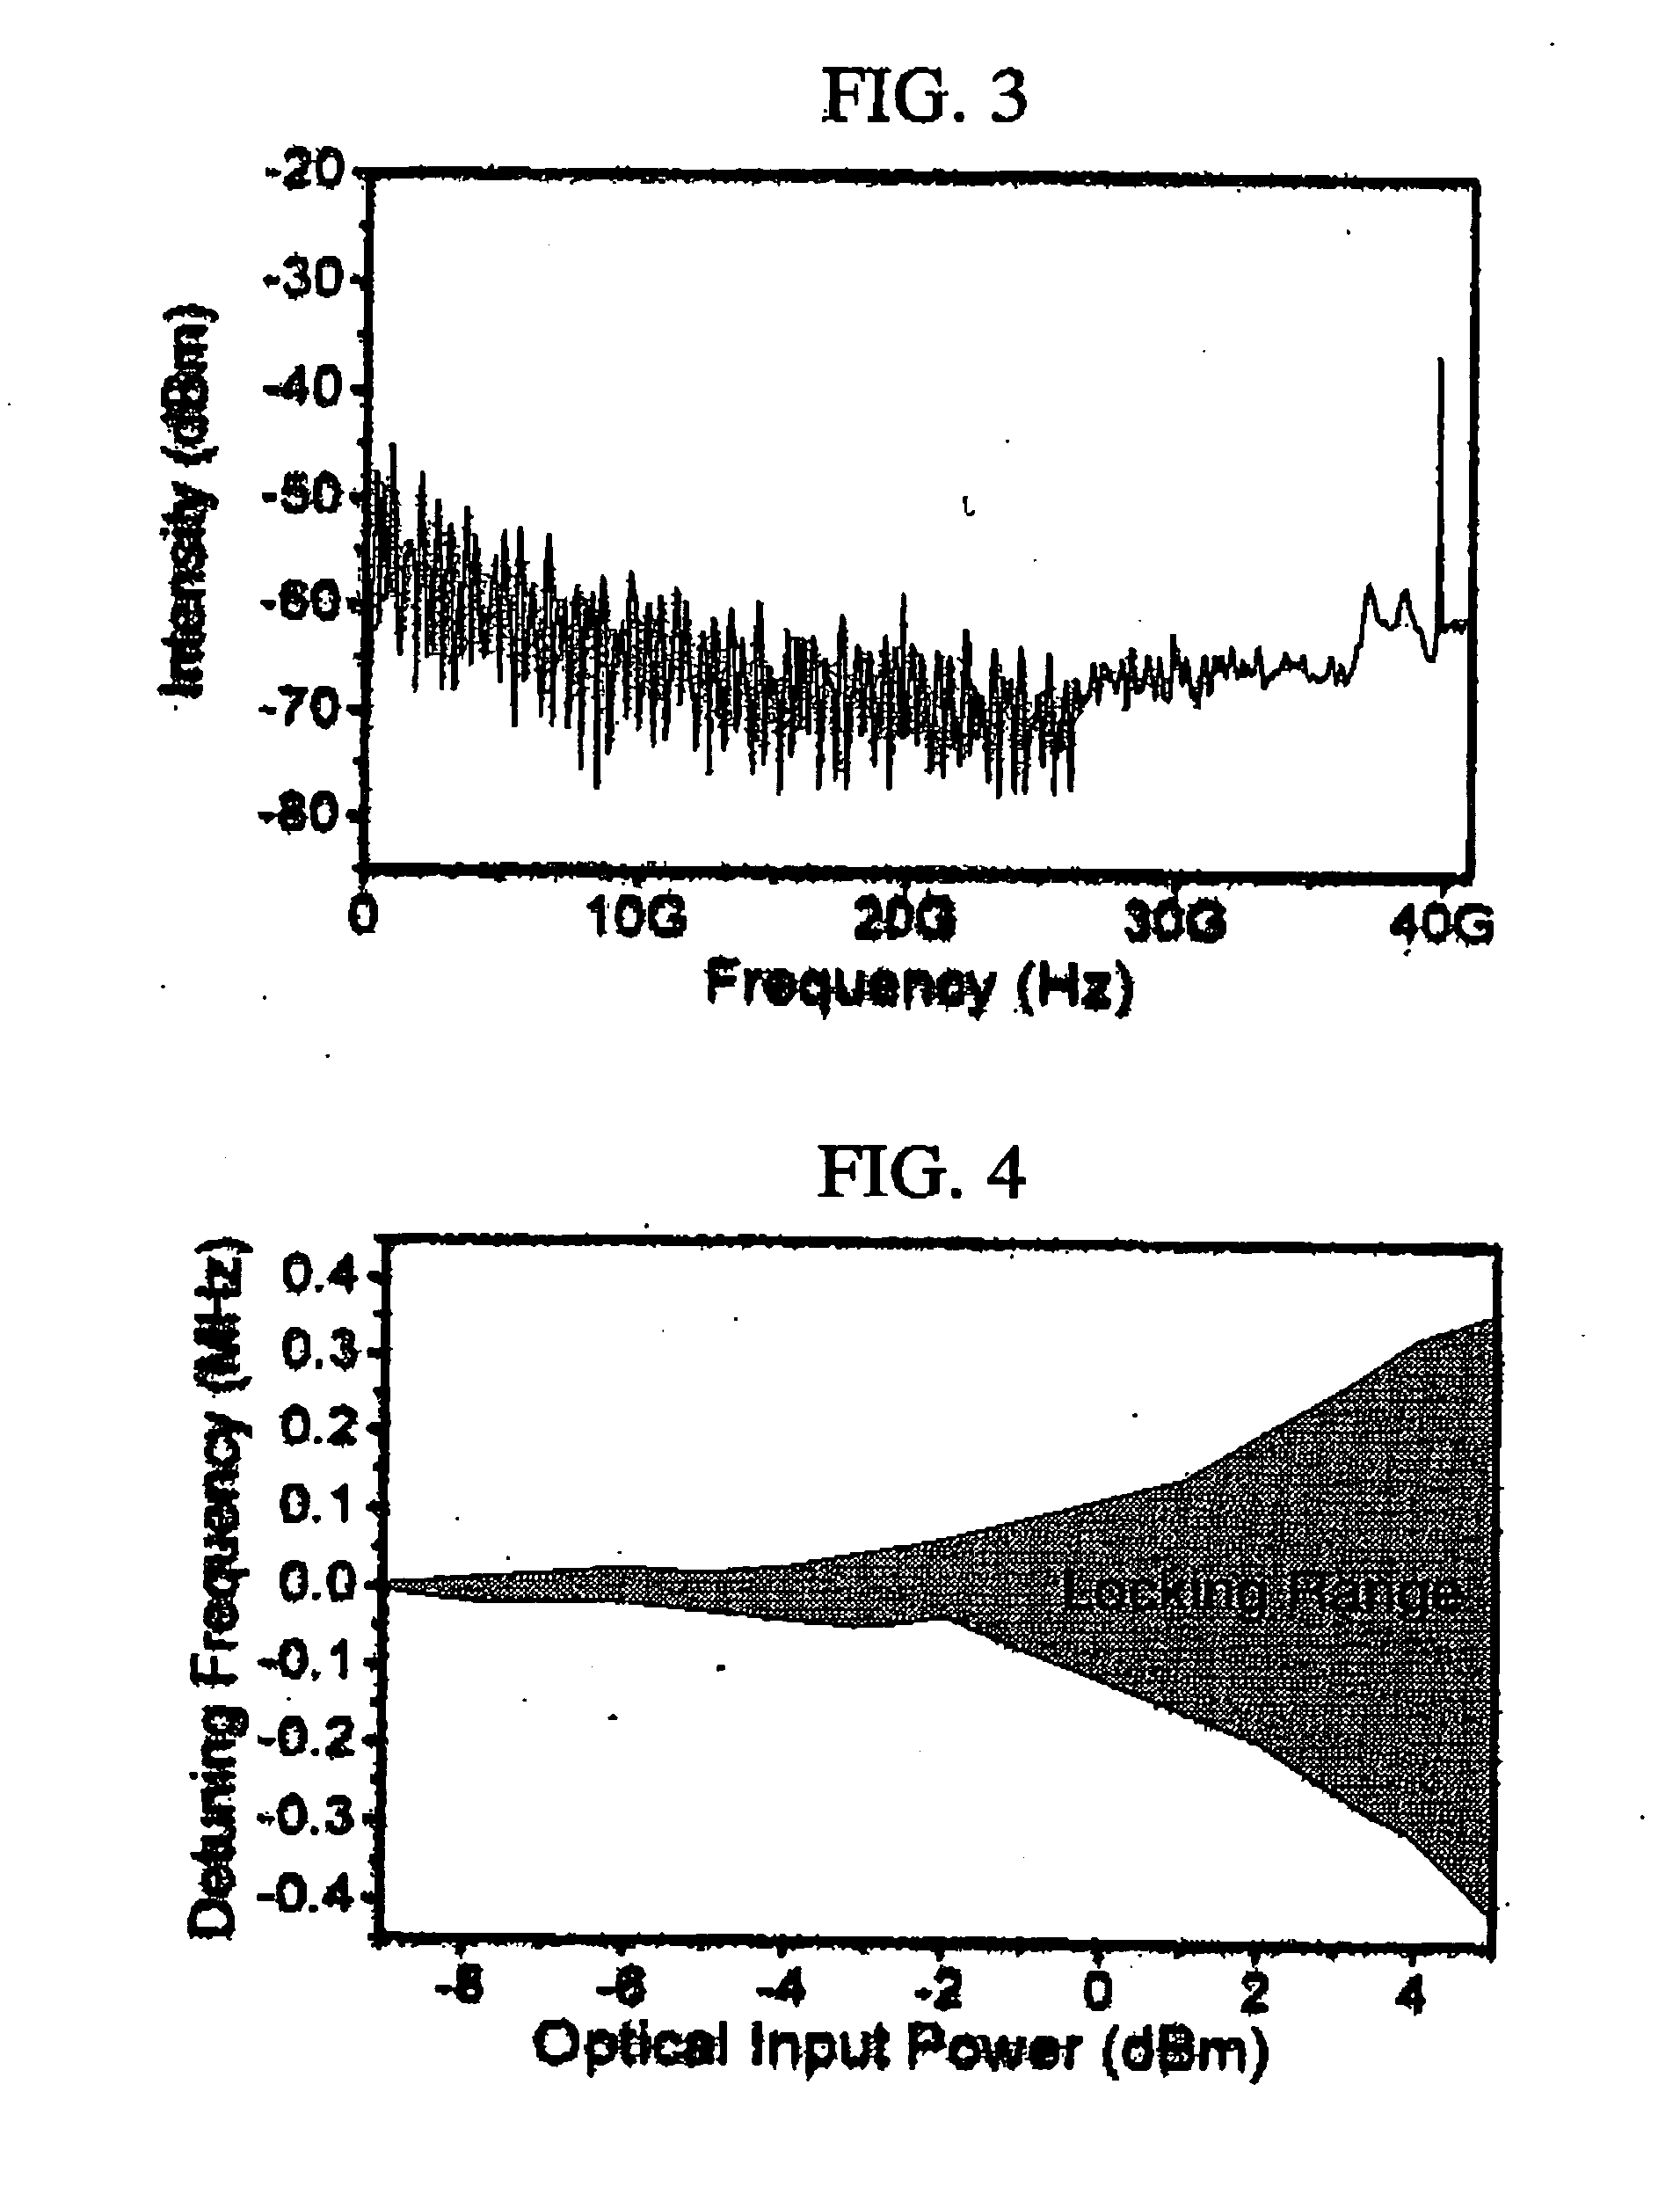 Apparatus for simultaneous OTDM demultiplexing, electrical clock recovery and optical clock generation, and optical clock recovery